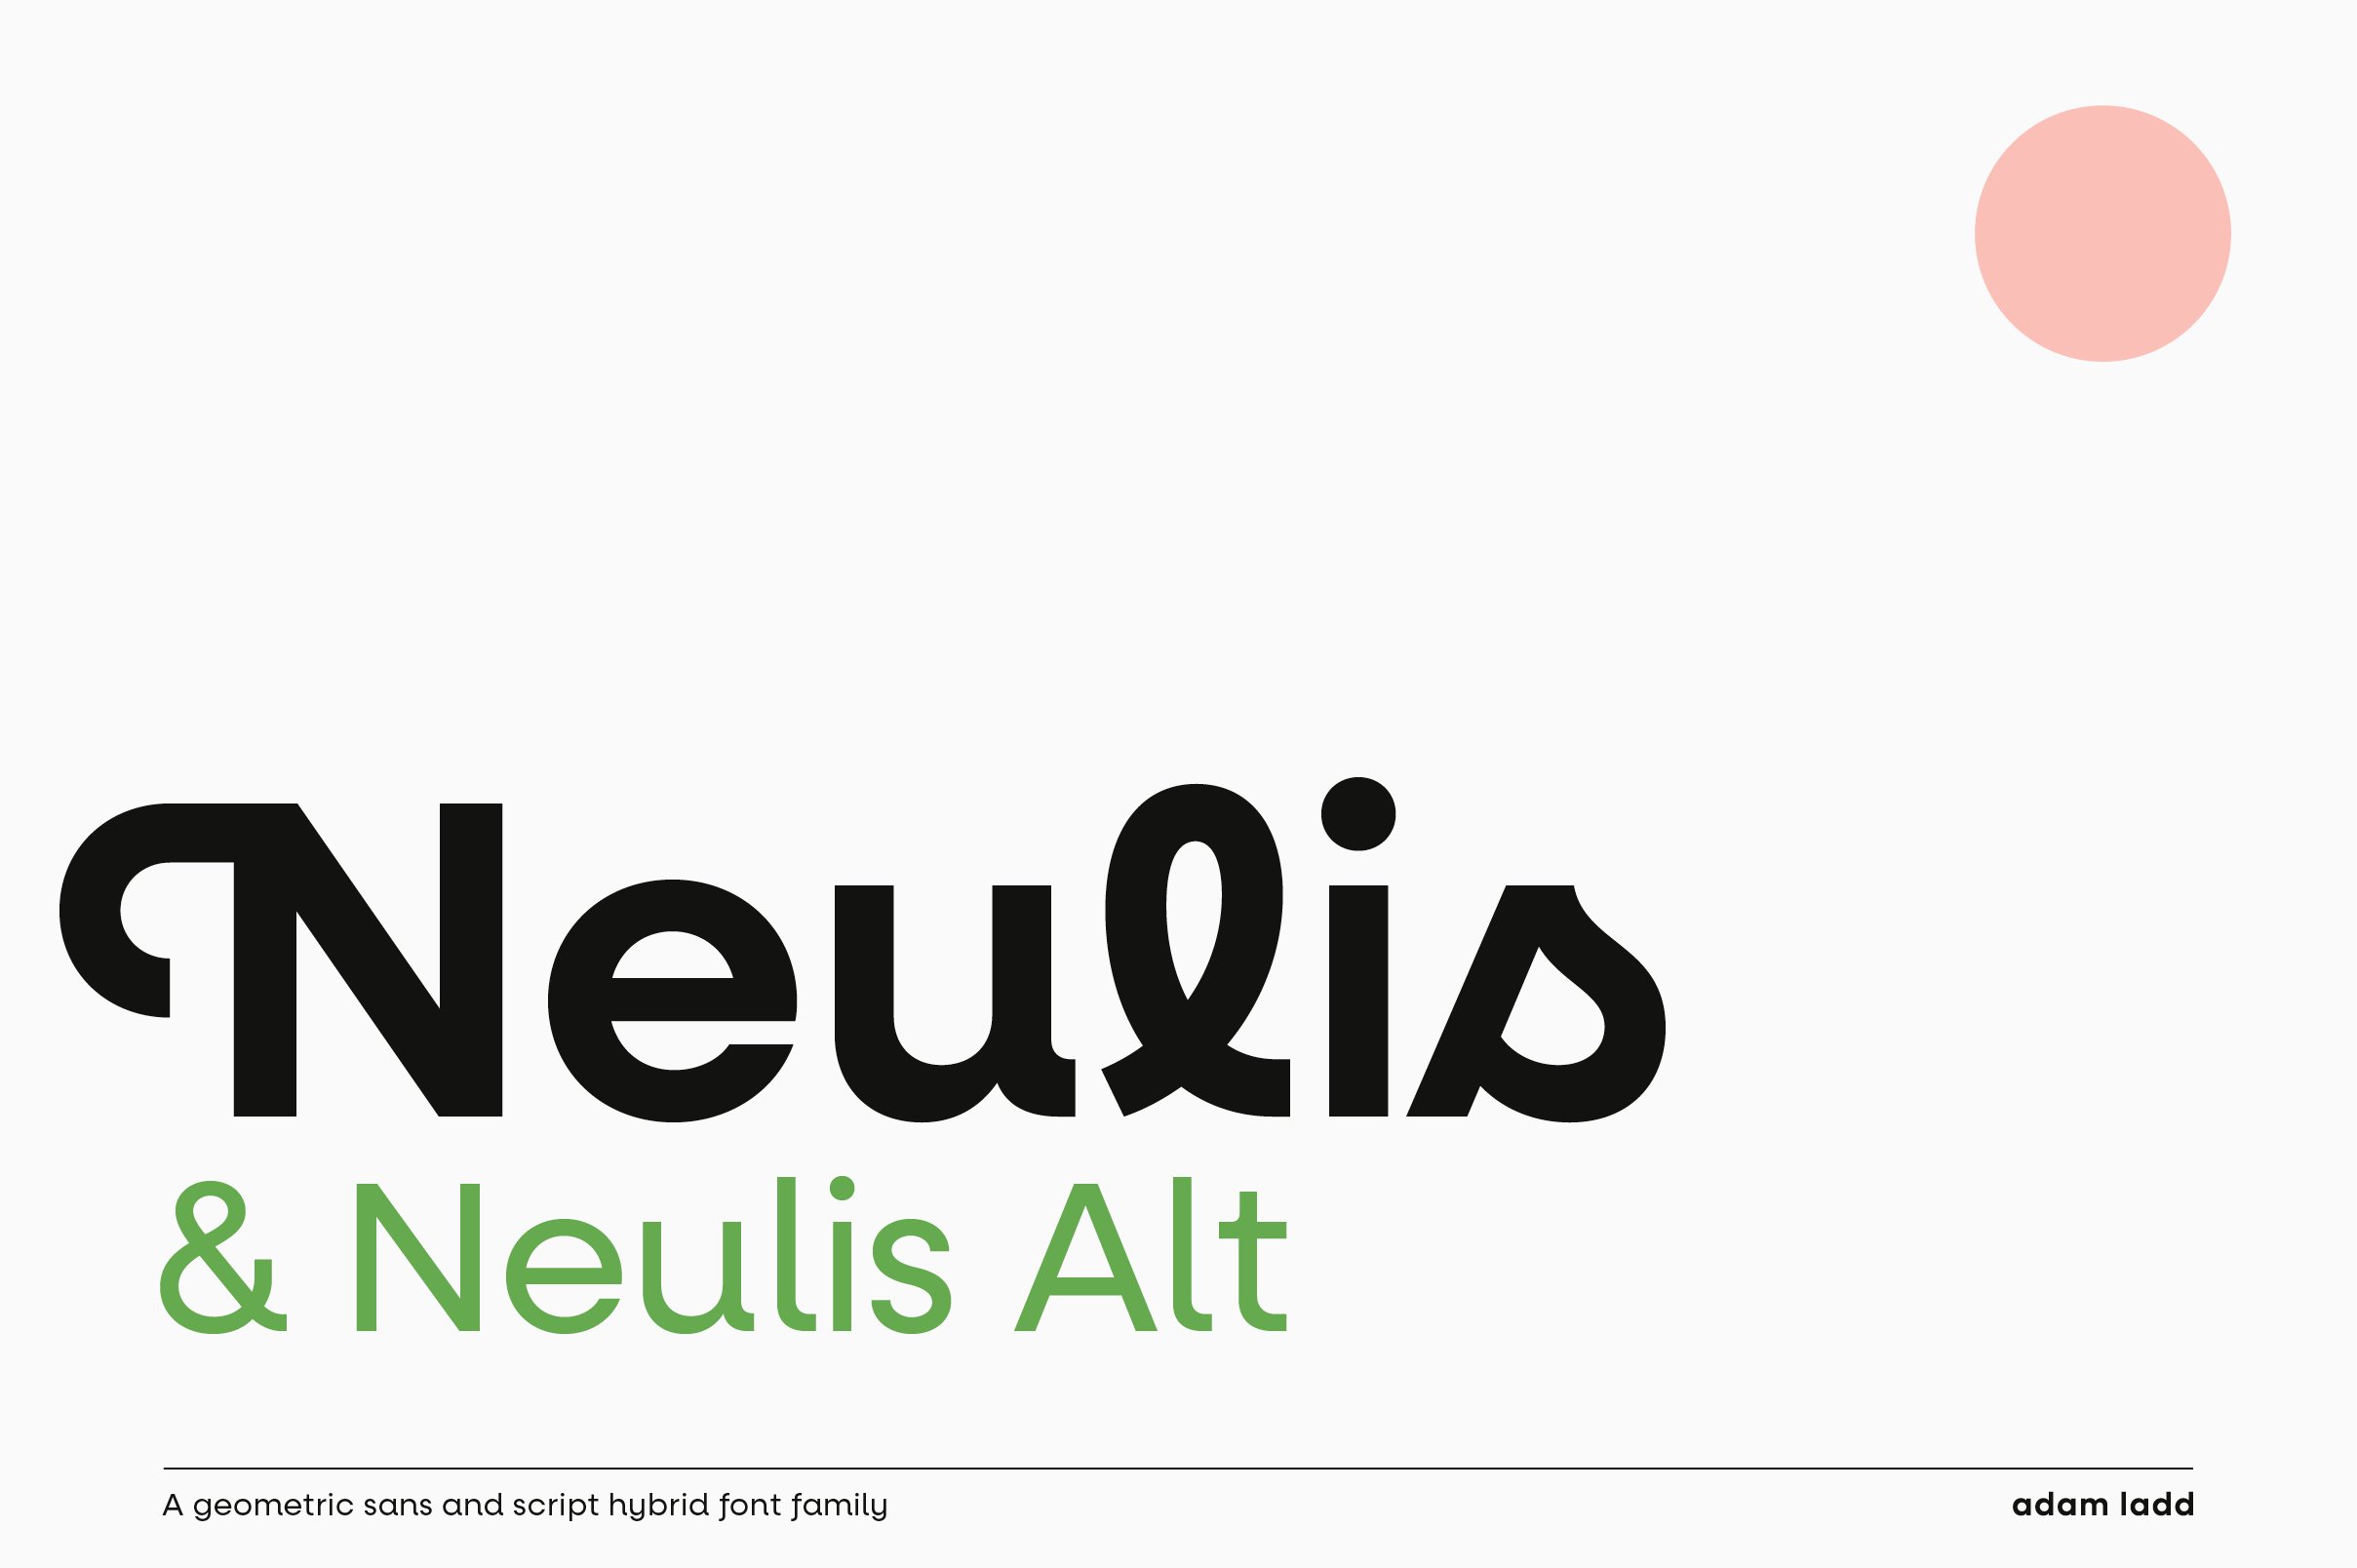 Neulis Font Family cover image.